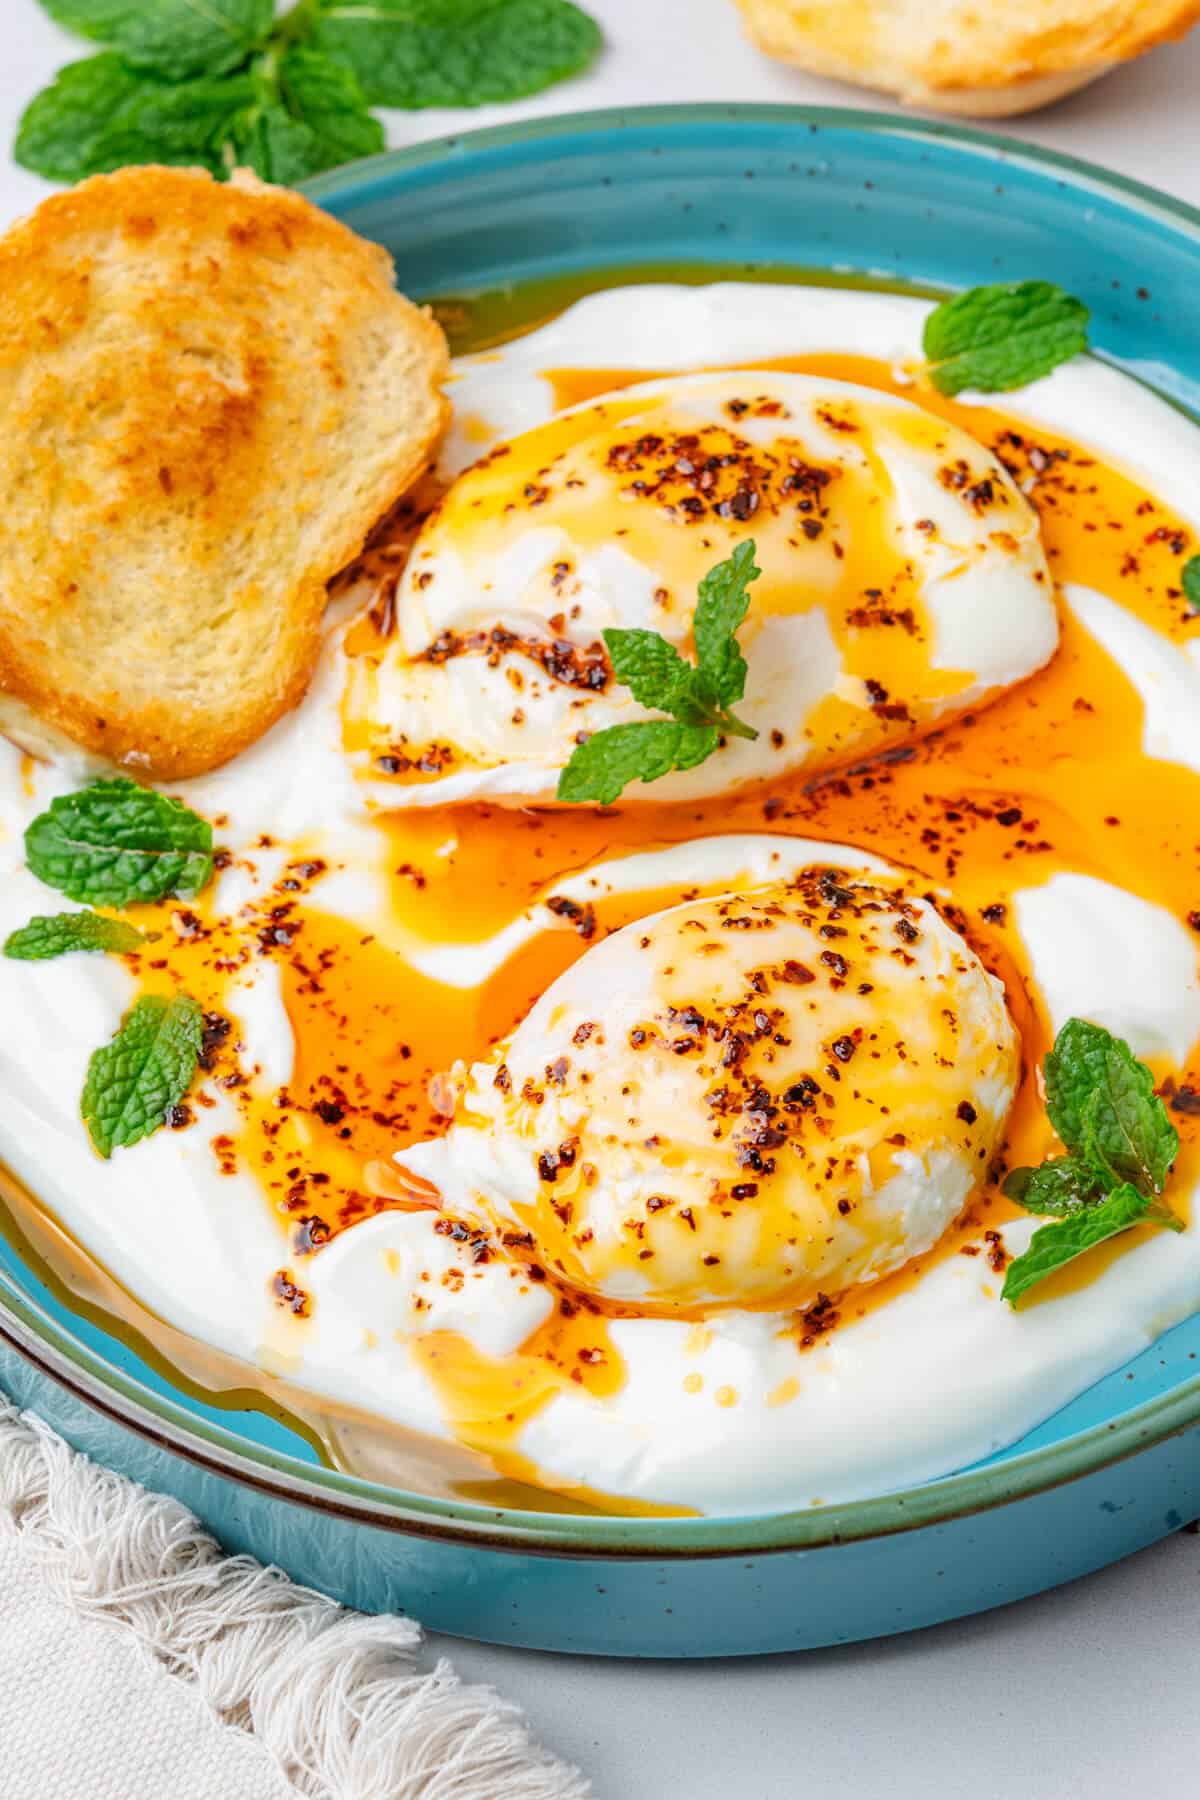 Cilbir turkish eggs with aleppo pepper oil, fresh mint and toasted bread